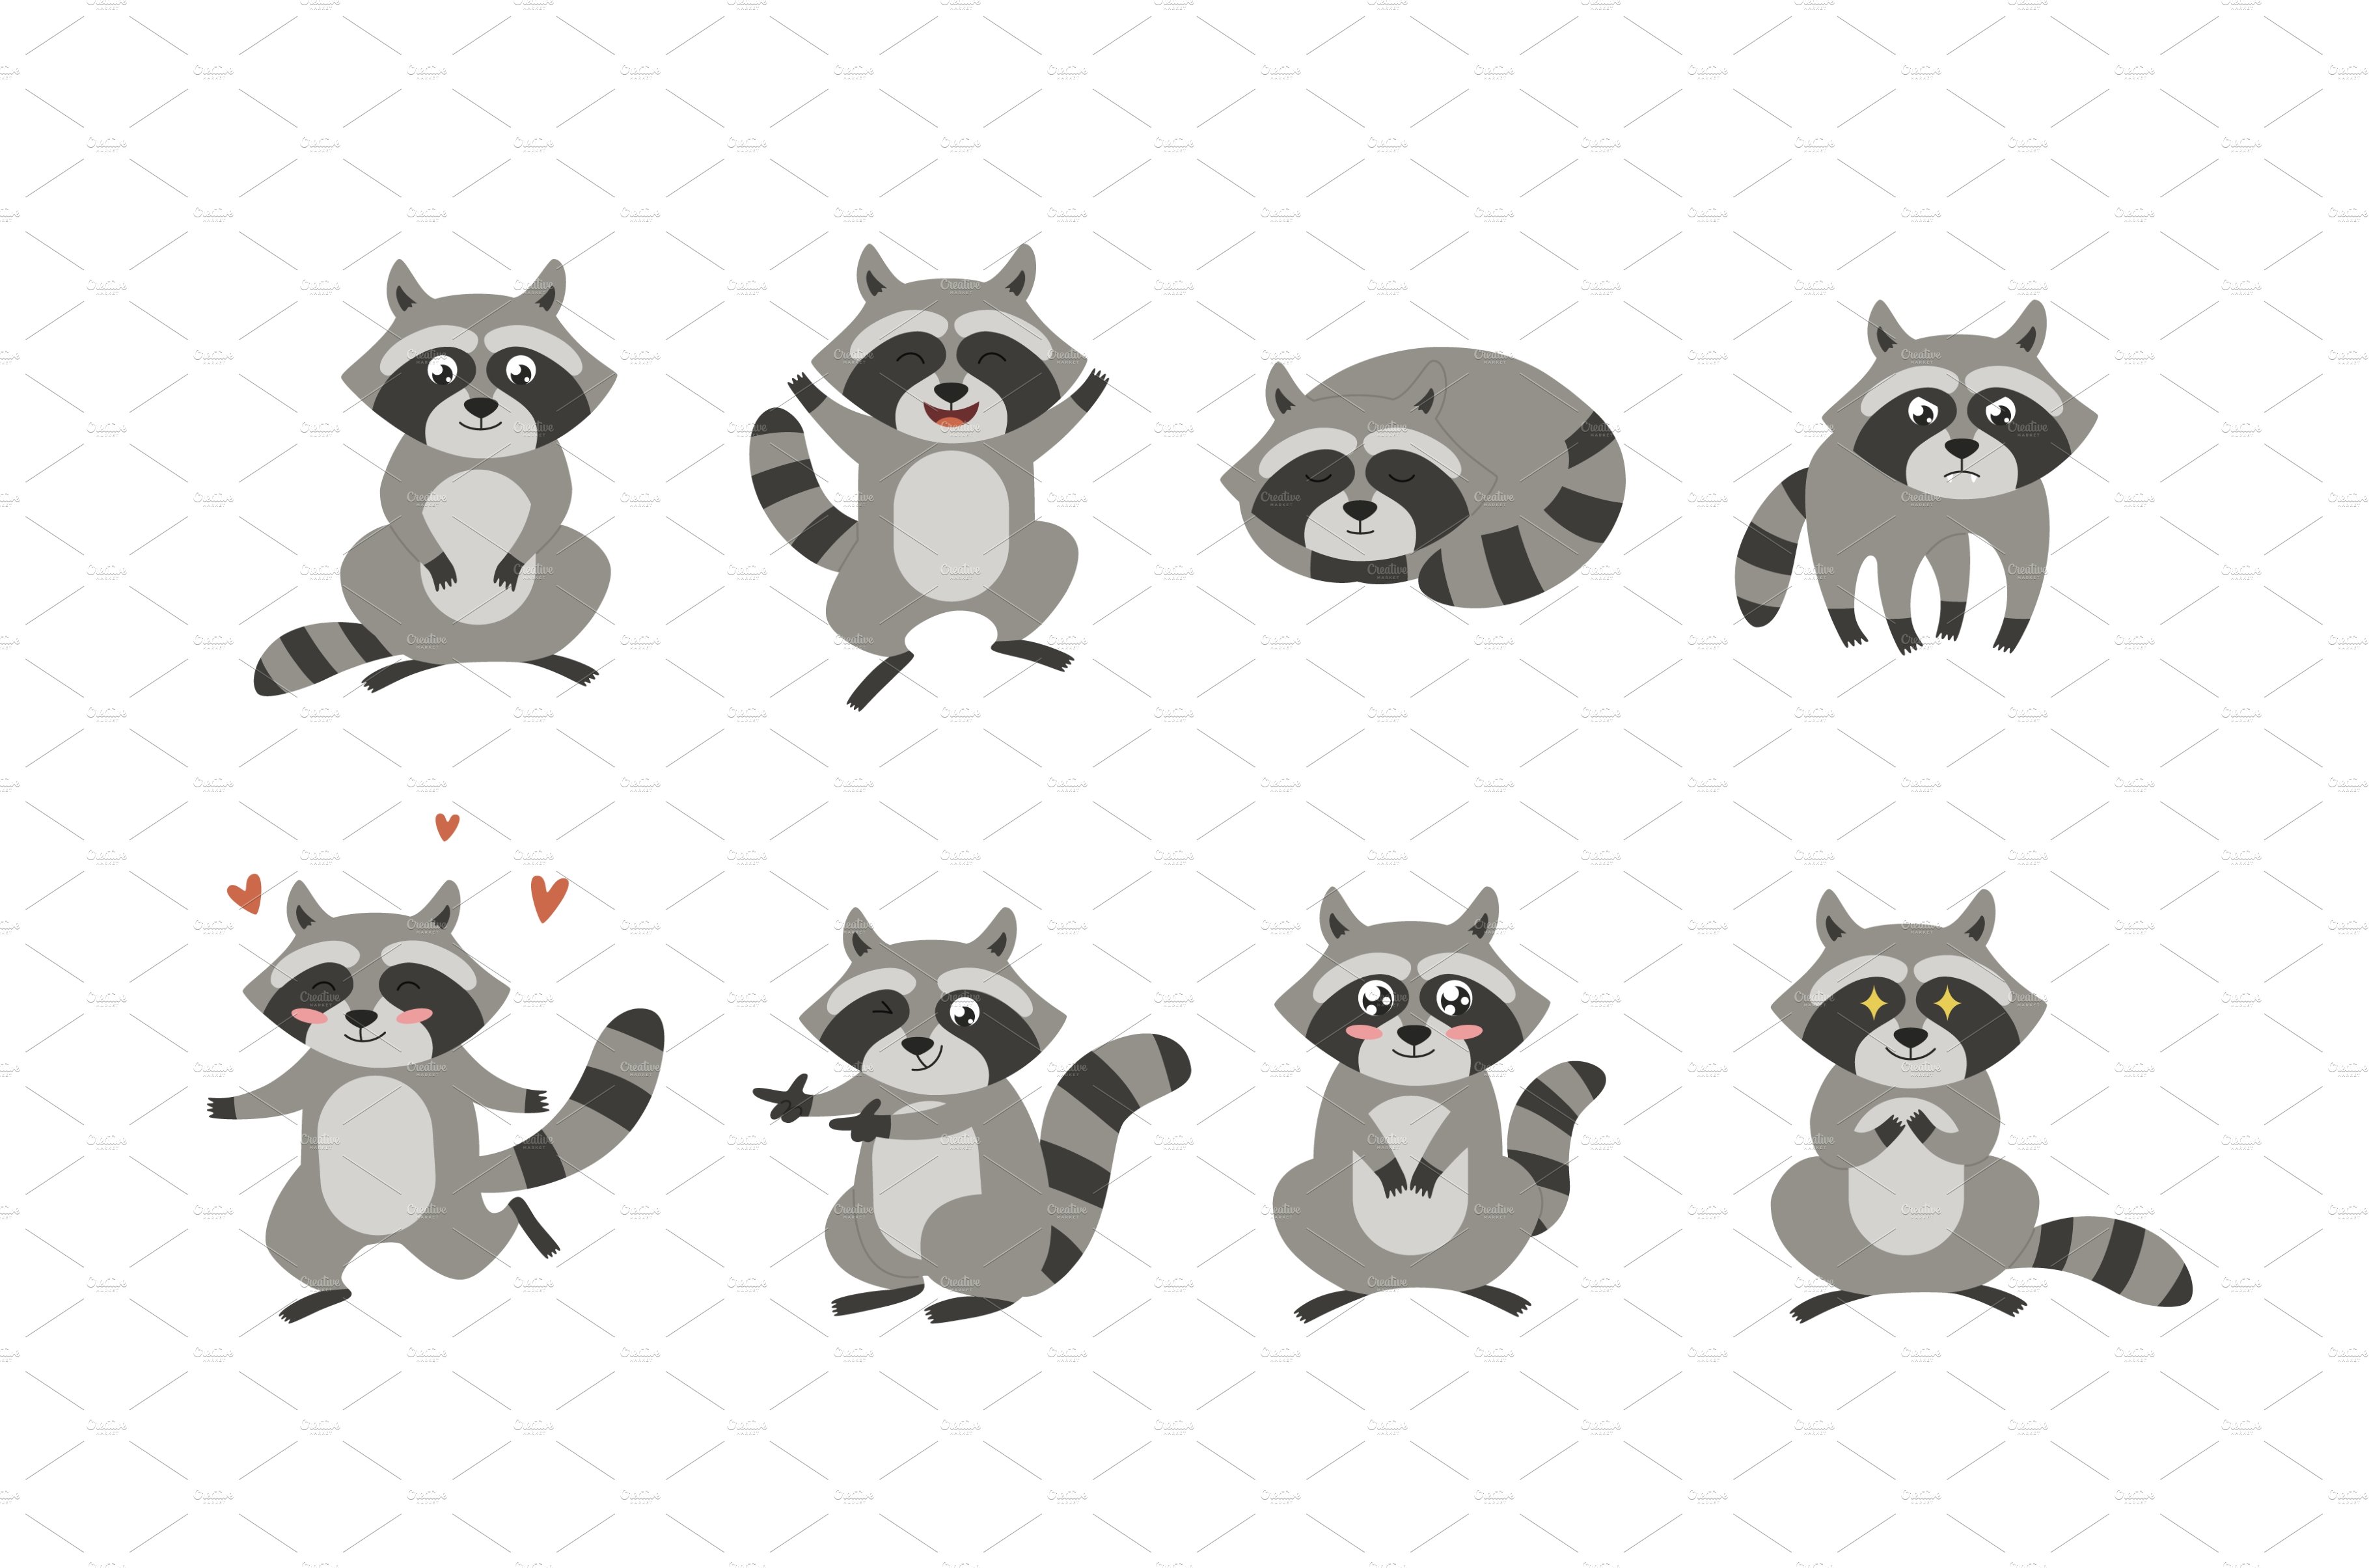 Raccoon in various poses with cover image.